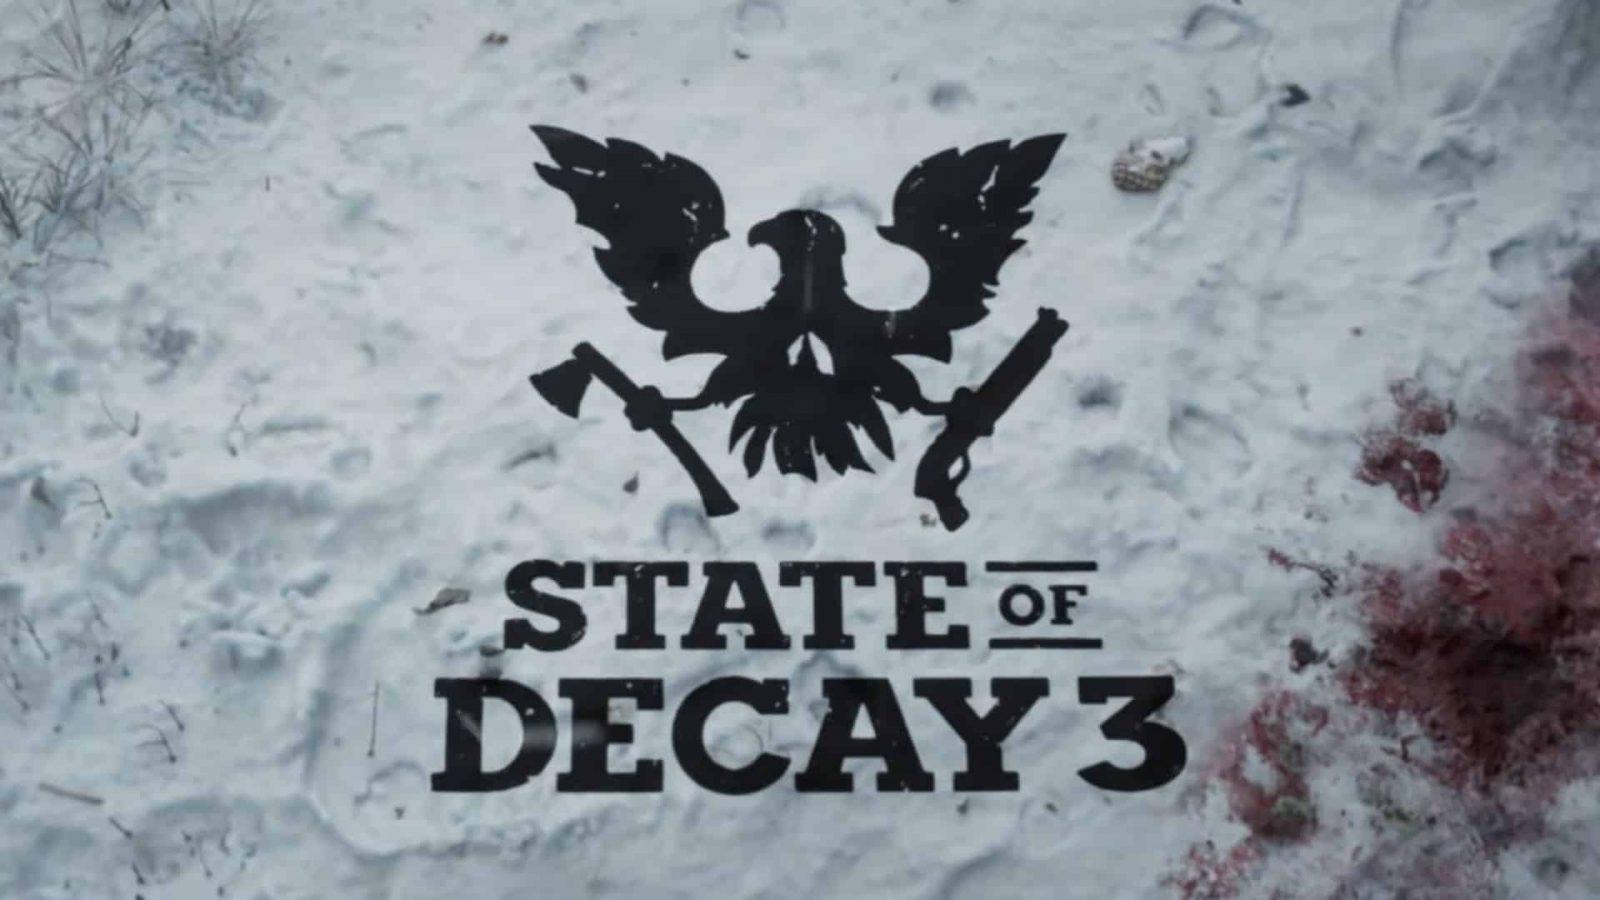 State of Decay 3 - Game Trailer 